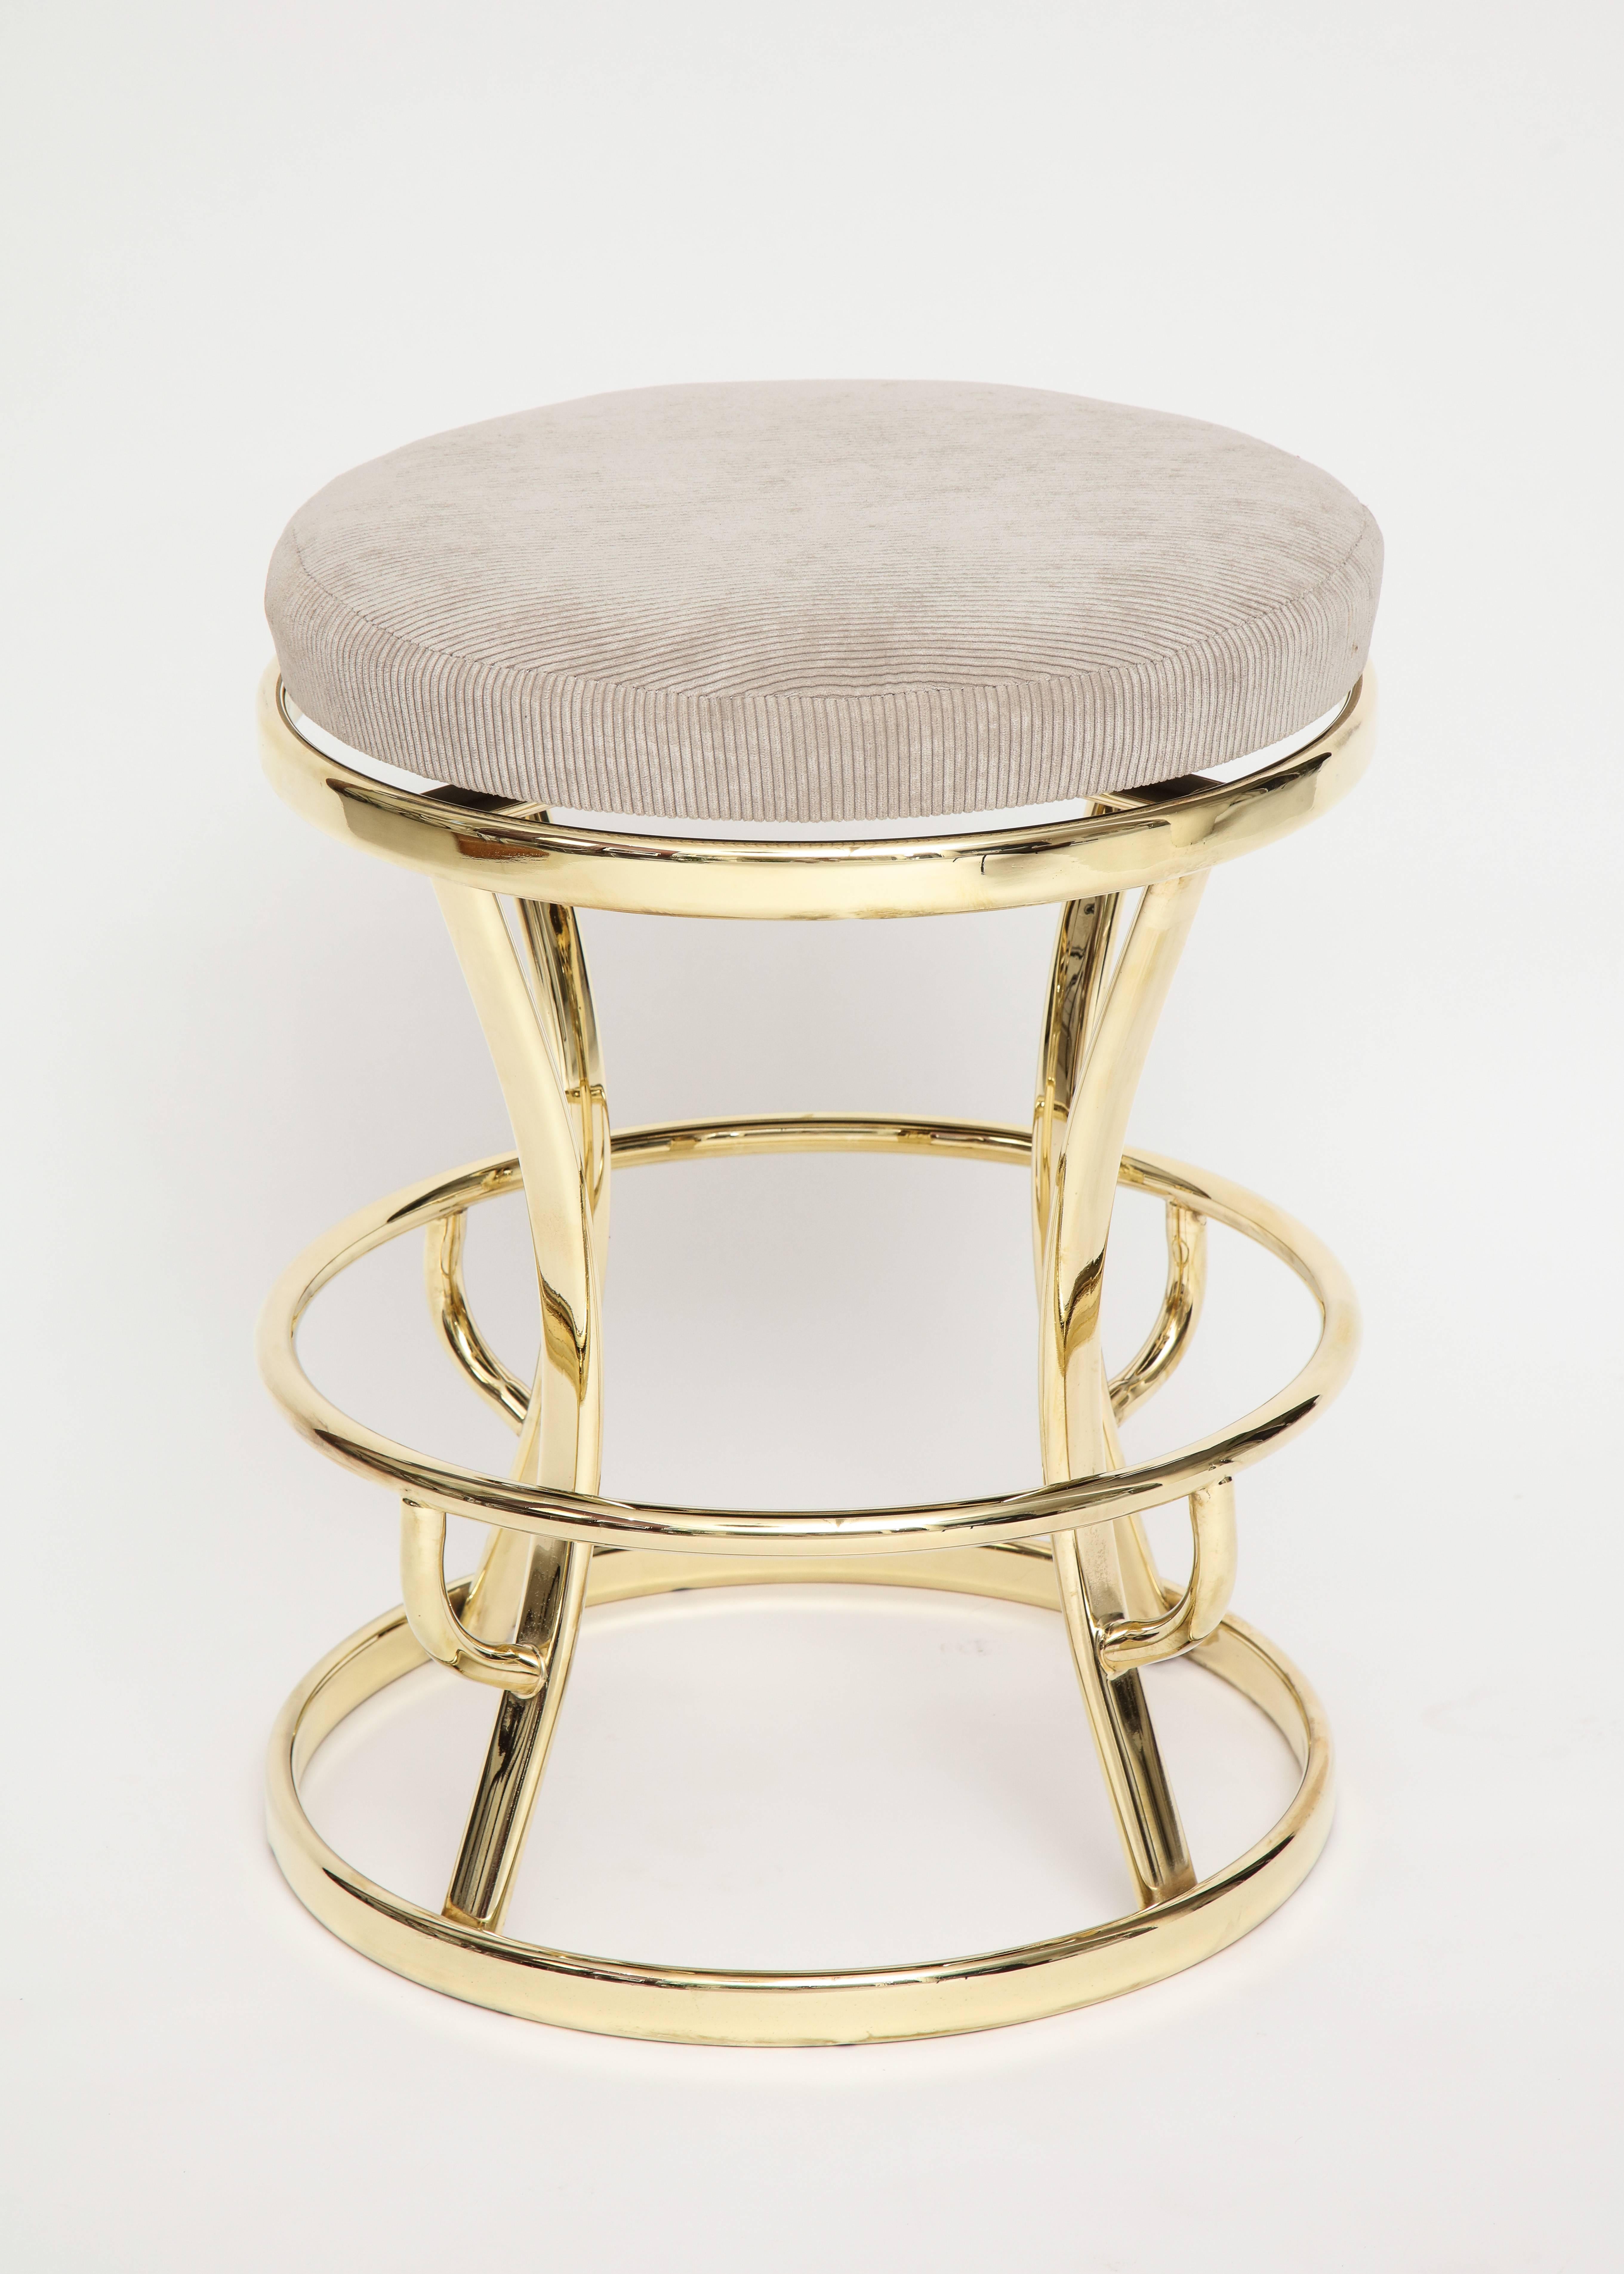 Brass and grey barstools, midcentury, France, 1970s

Beautiful restored brass barstools with grey corduroy top that swivels. Adds glamour to any room. Six total.